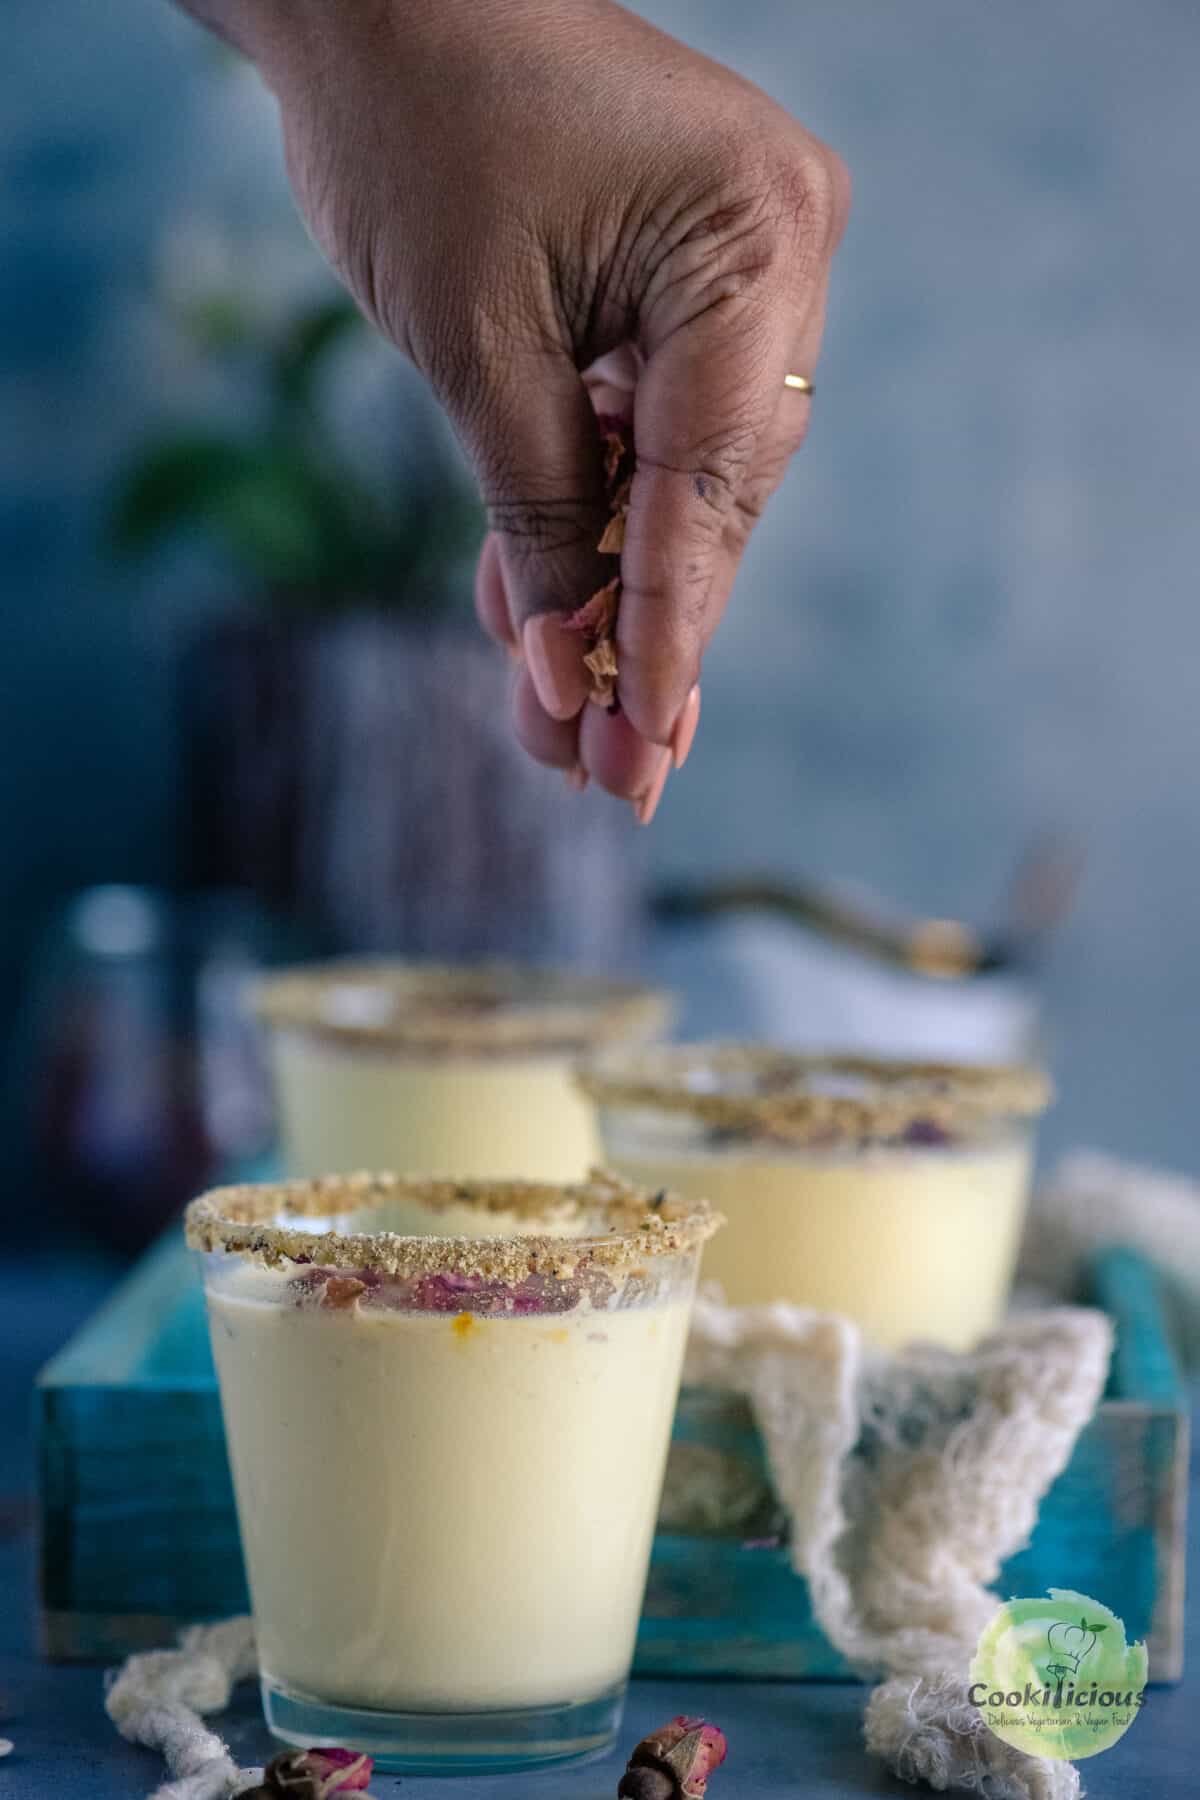 a hand sprinkling rose petals over a glass of thandai drink